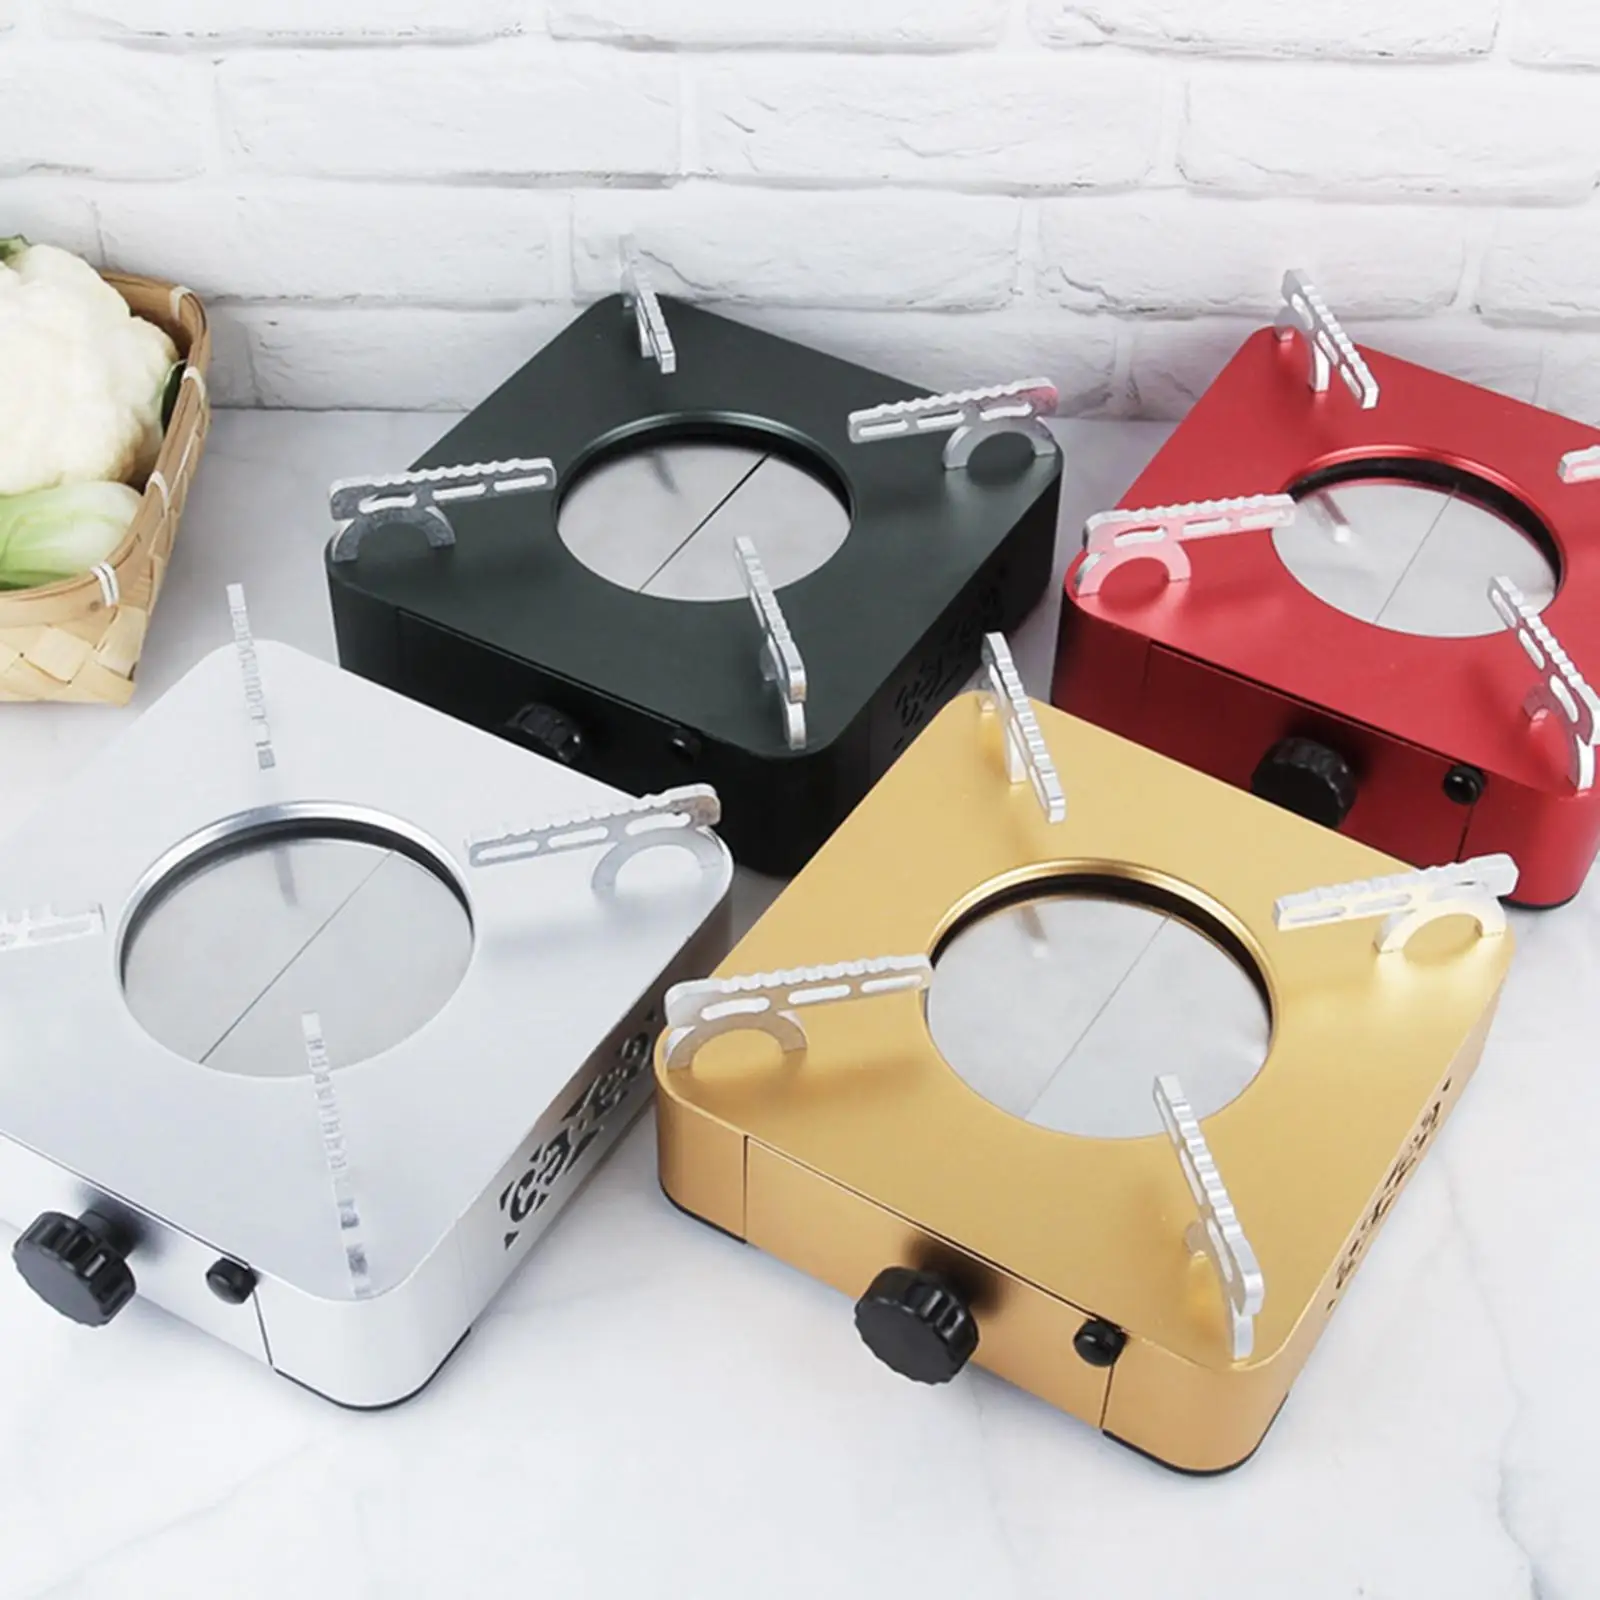 Portable Alcohol Stove Lightweight for Outdoor Camping BBQ Cooking Picnic Hiking